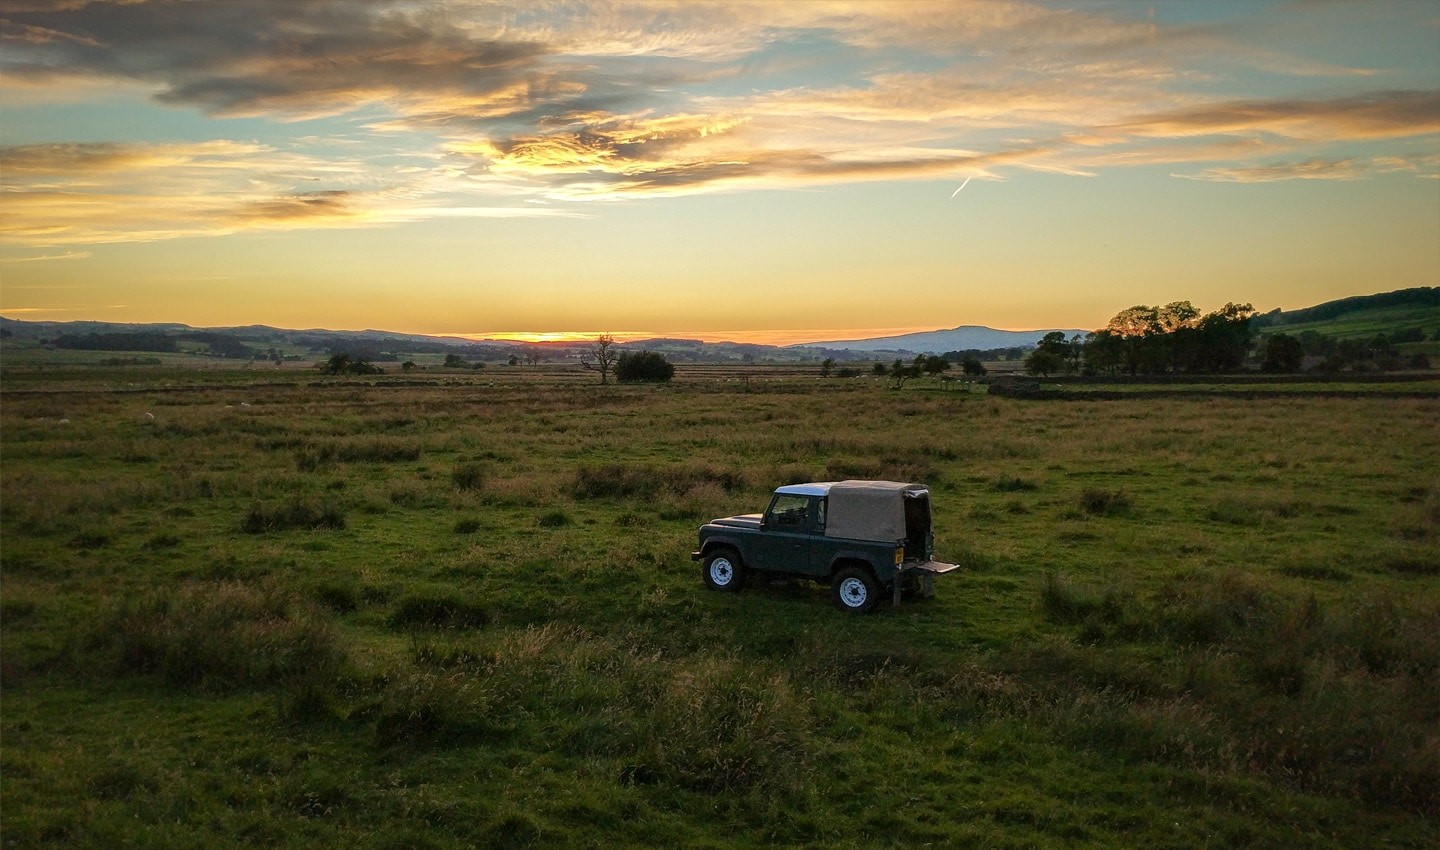 The University of Cardiff has created a conversion kit for old Land Rover Defenders.